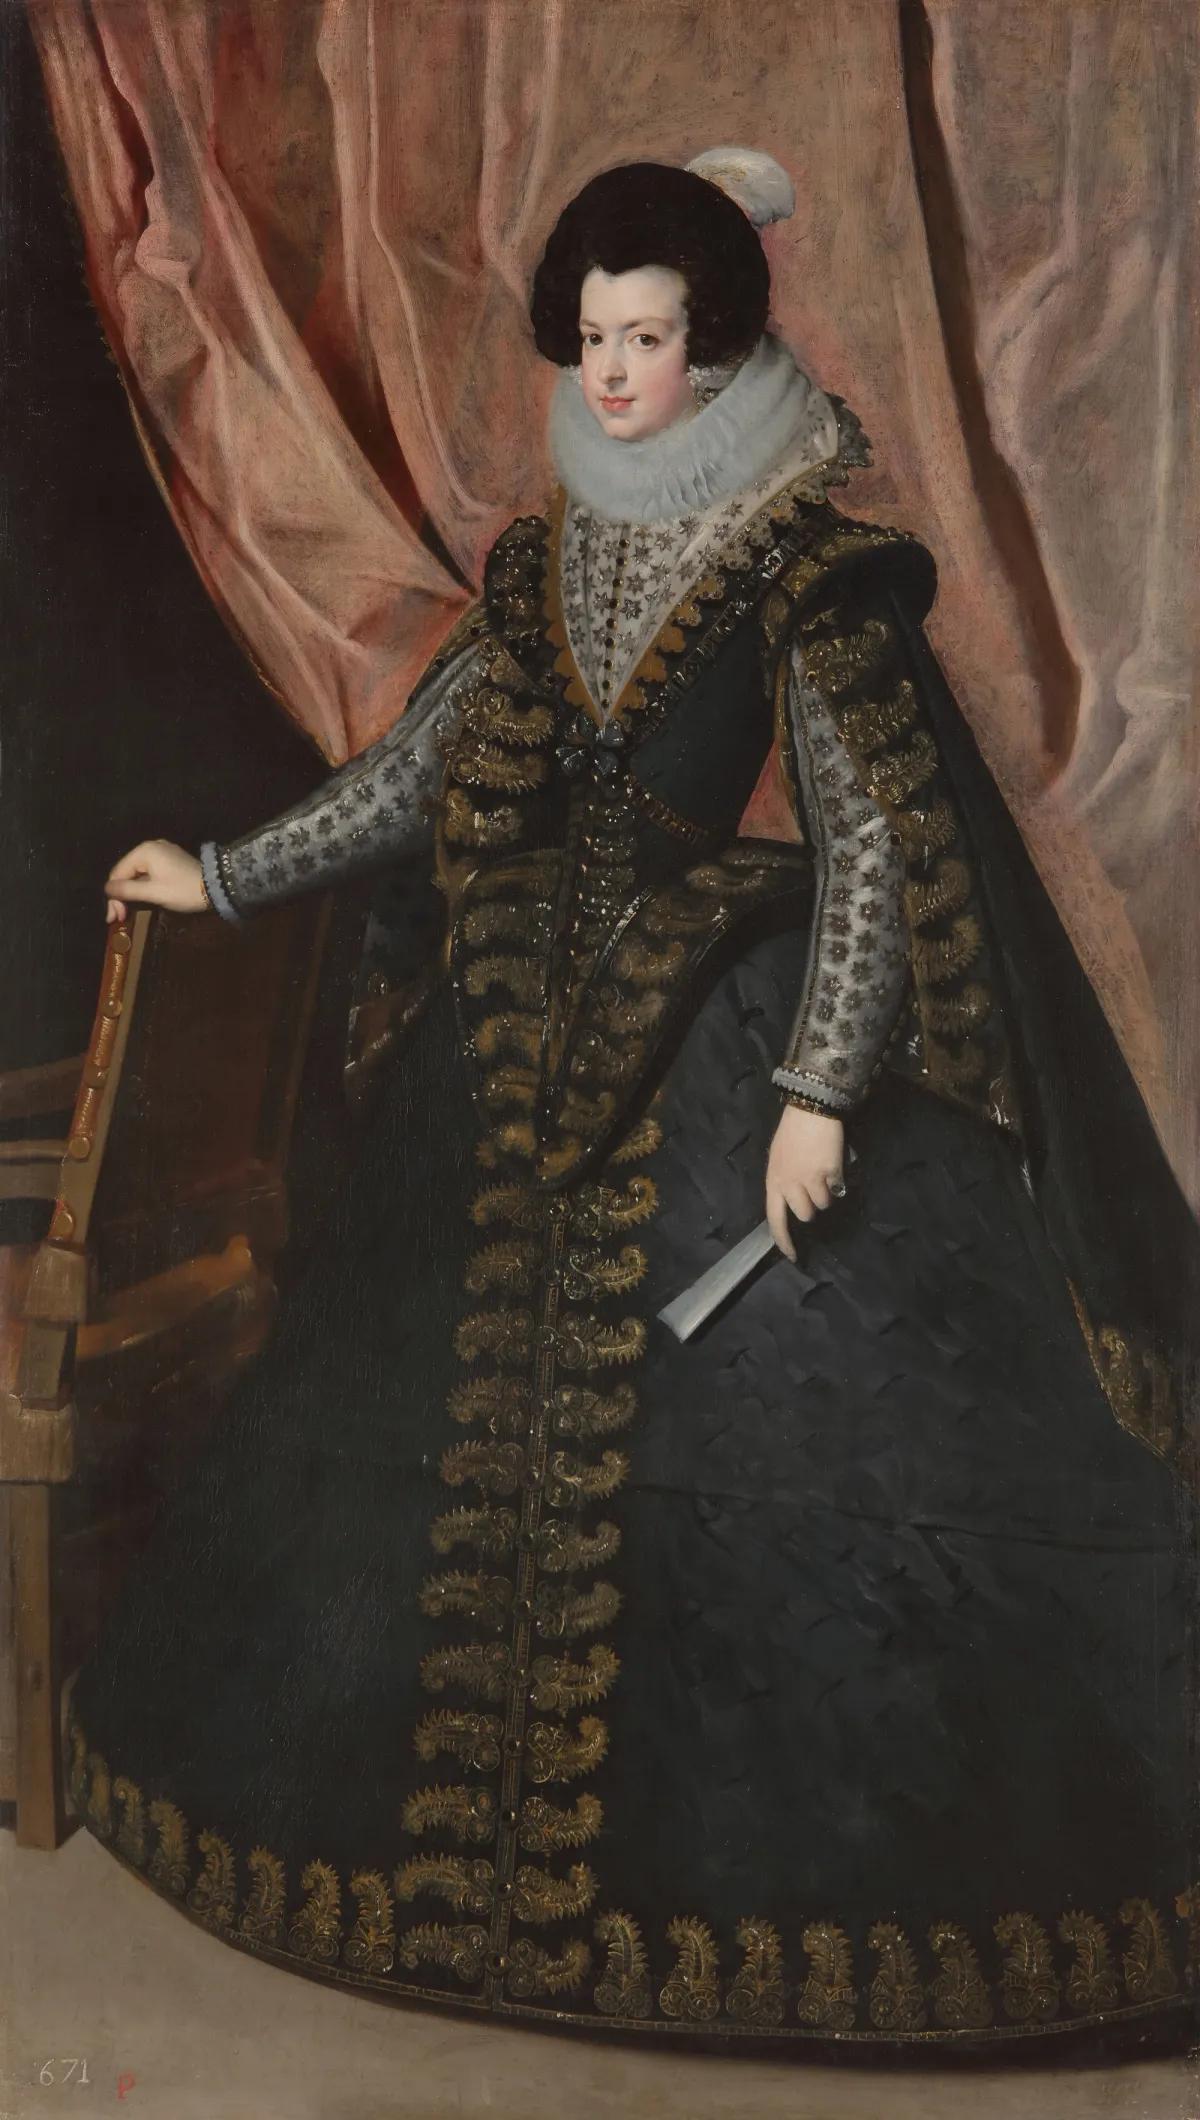 Isabel de Borbón, Queen of Spain (1632) by Diego Velázquez Image: Courtesy Sotheby's